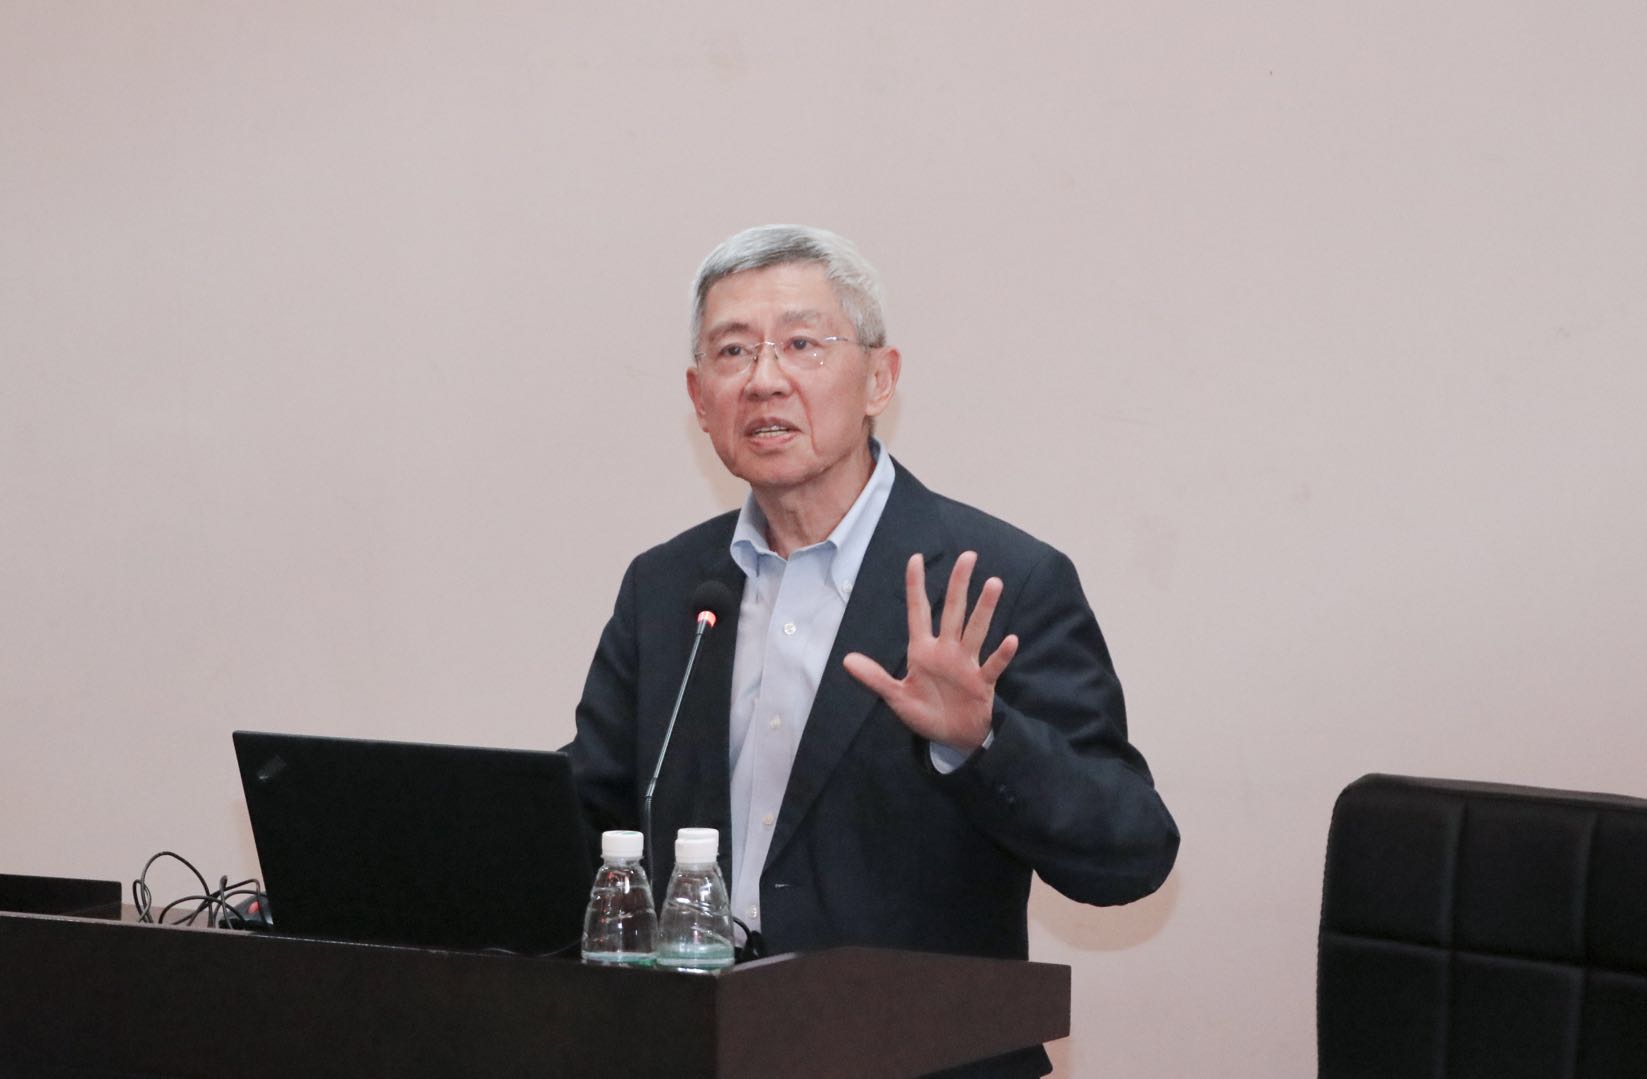 Dr. Cheng Kai-ming lectures on the challenges facing Higher Education